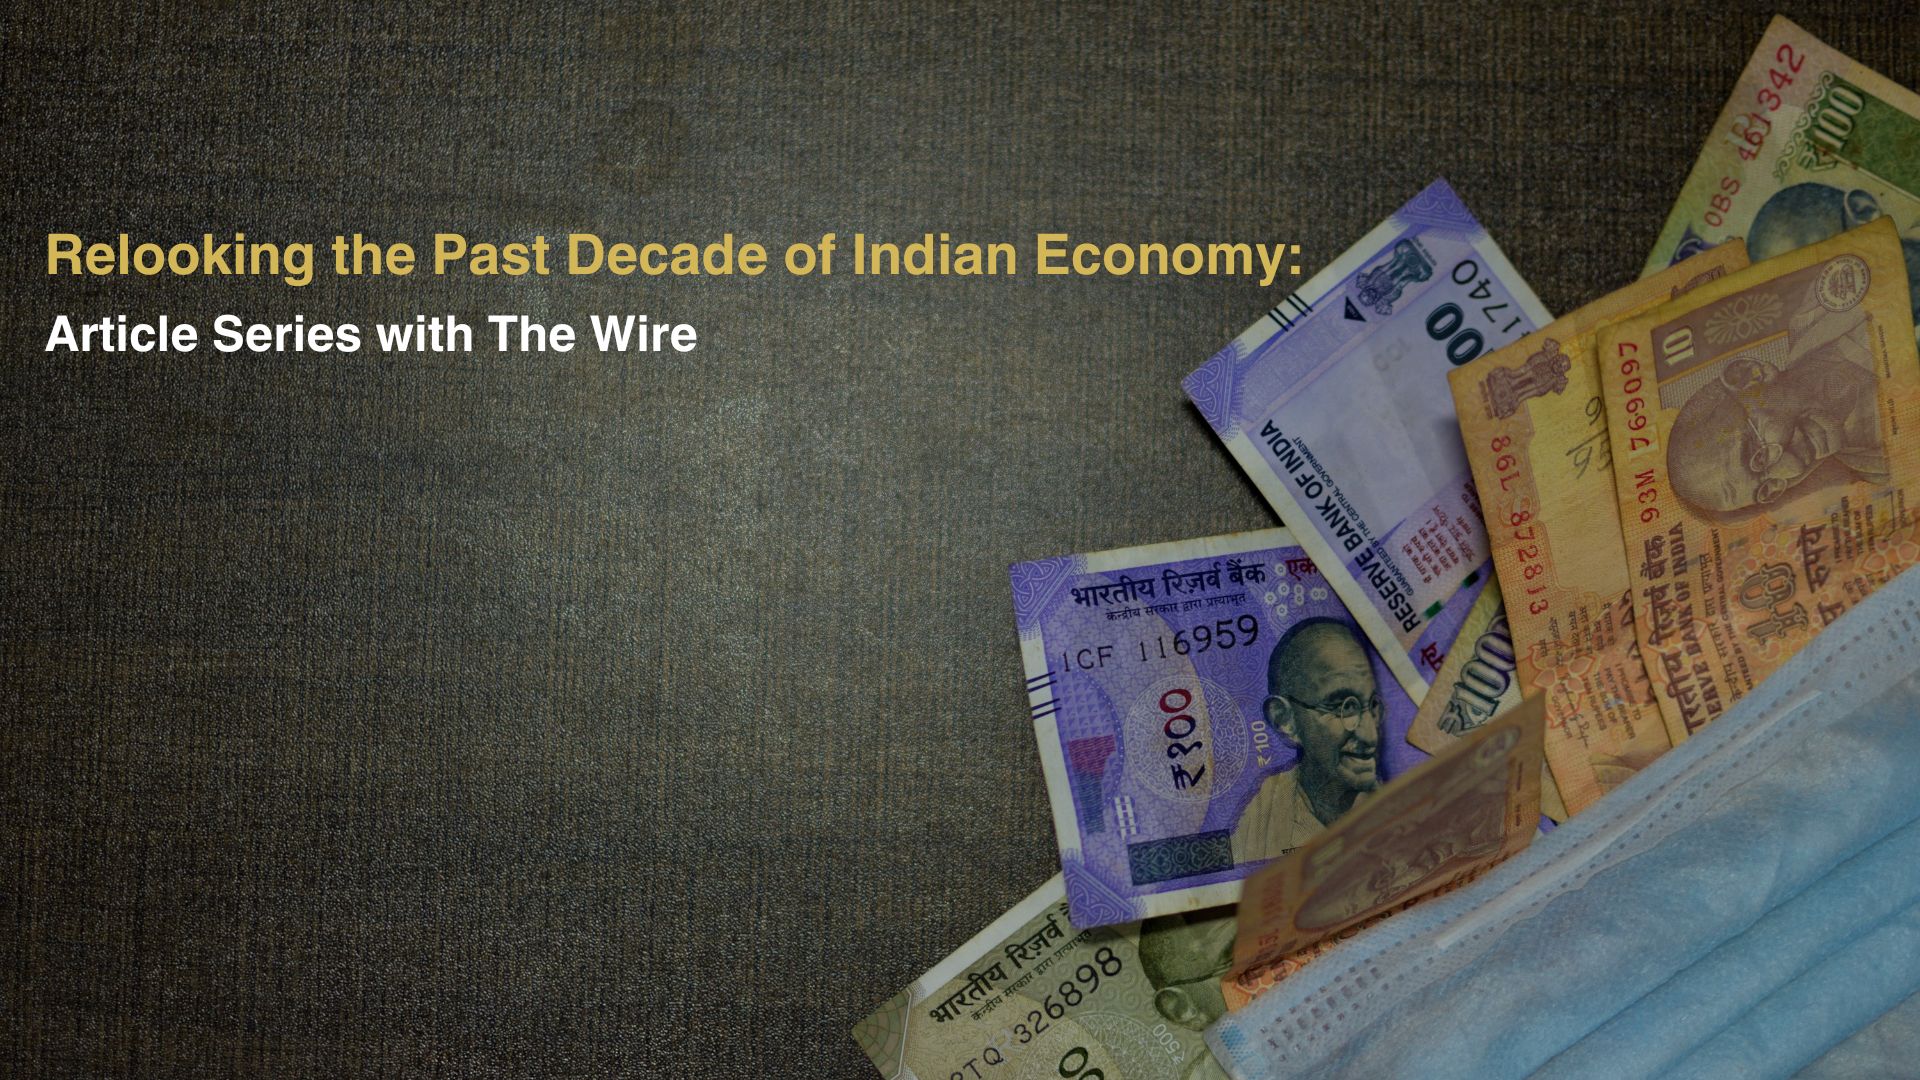 Relooking the Past Decade of Indian Economy: Article Series with The Wire